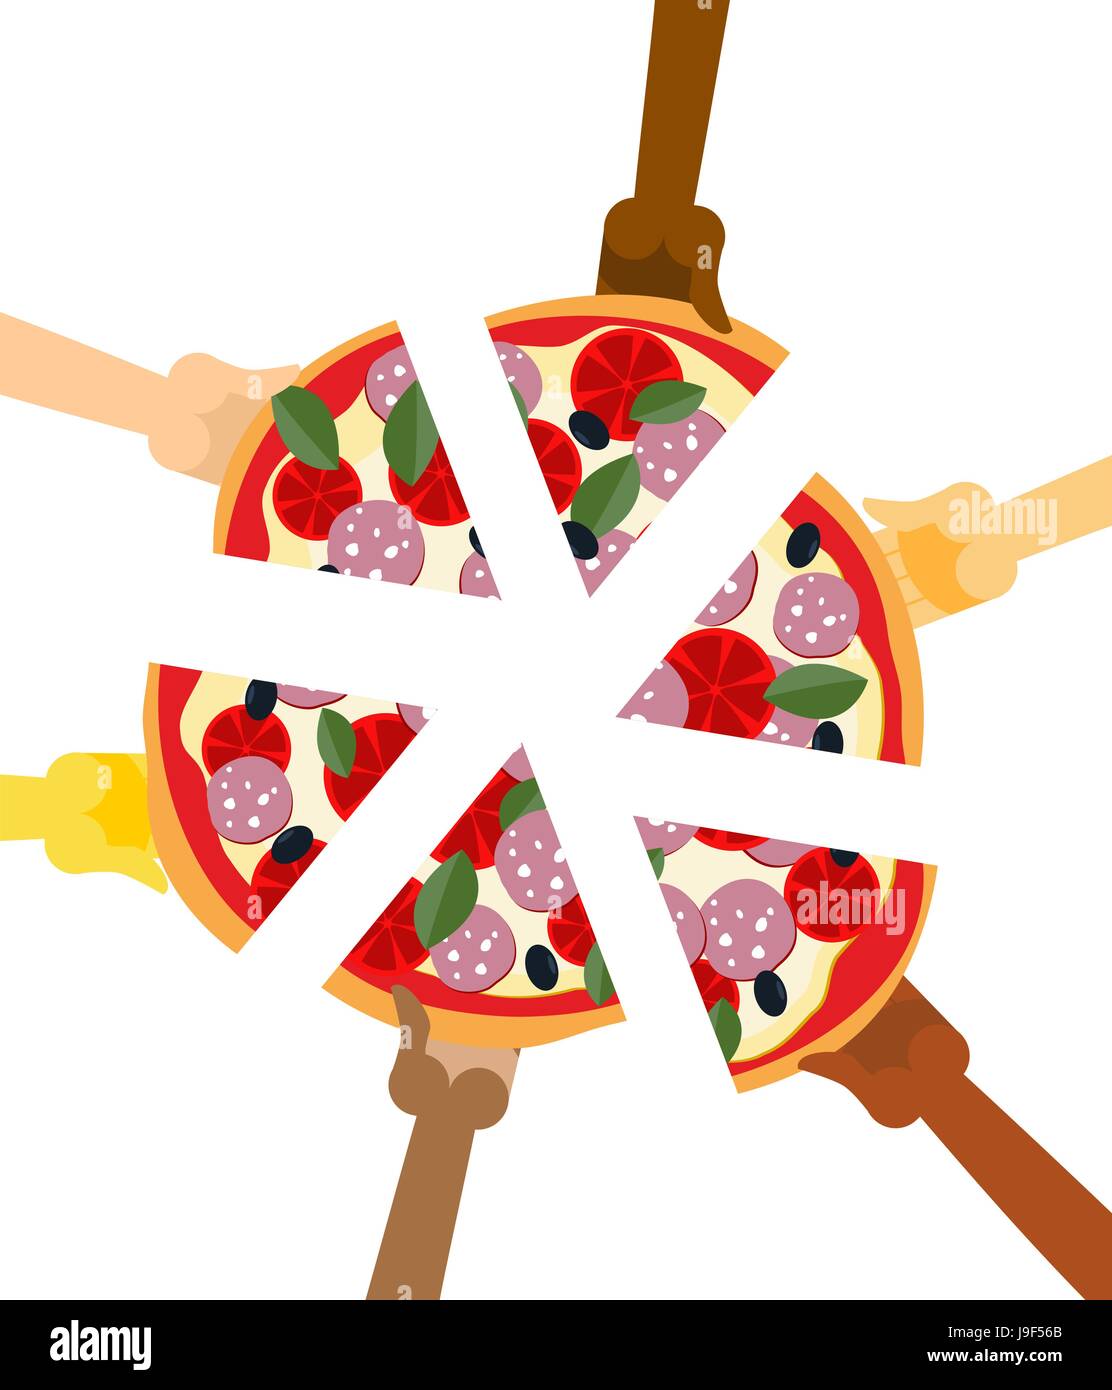 people eating pizza clipart